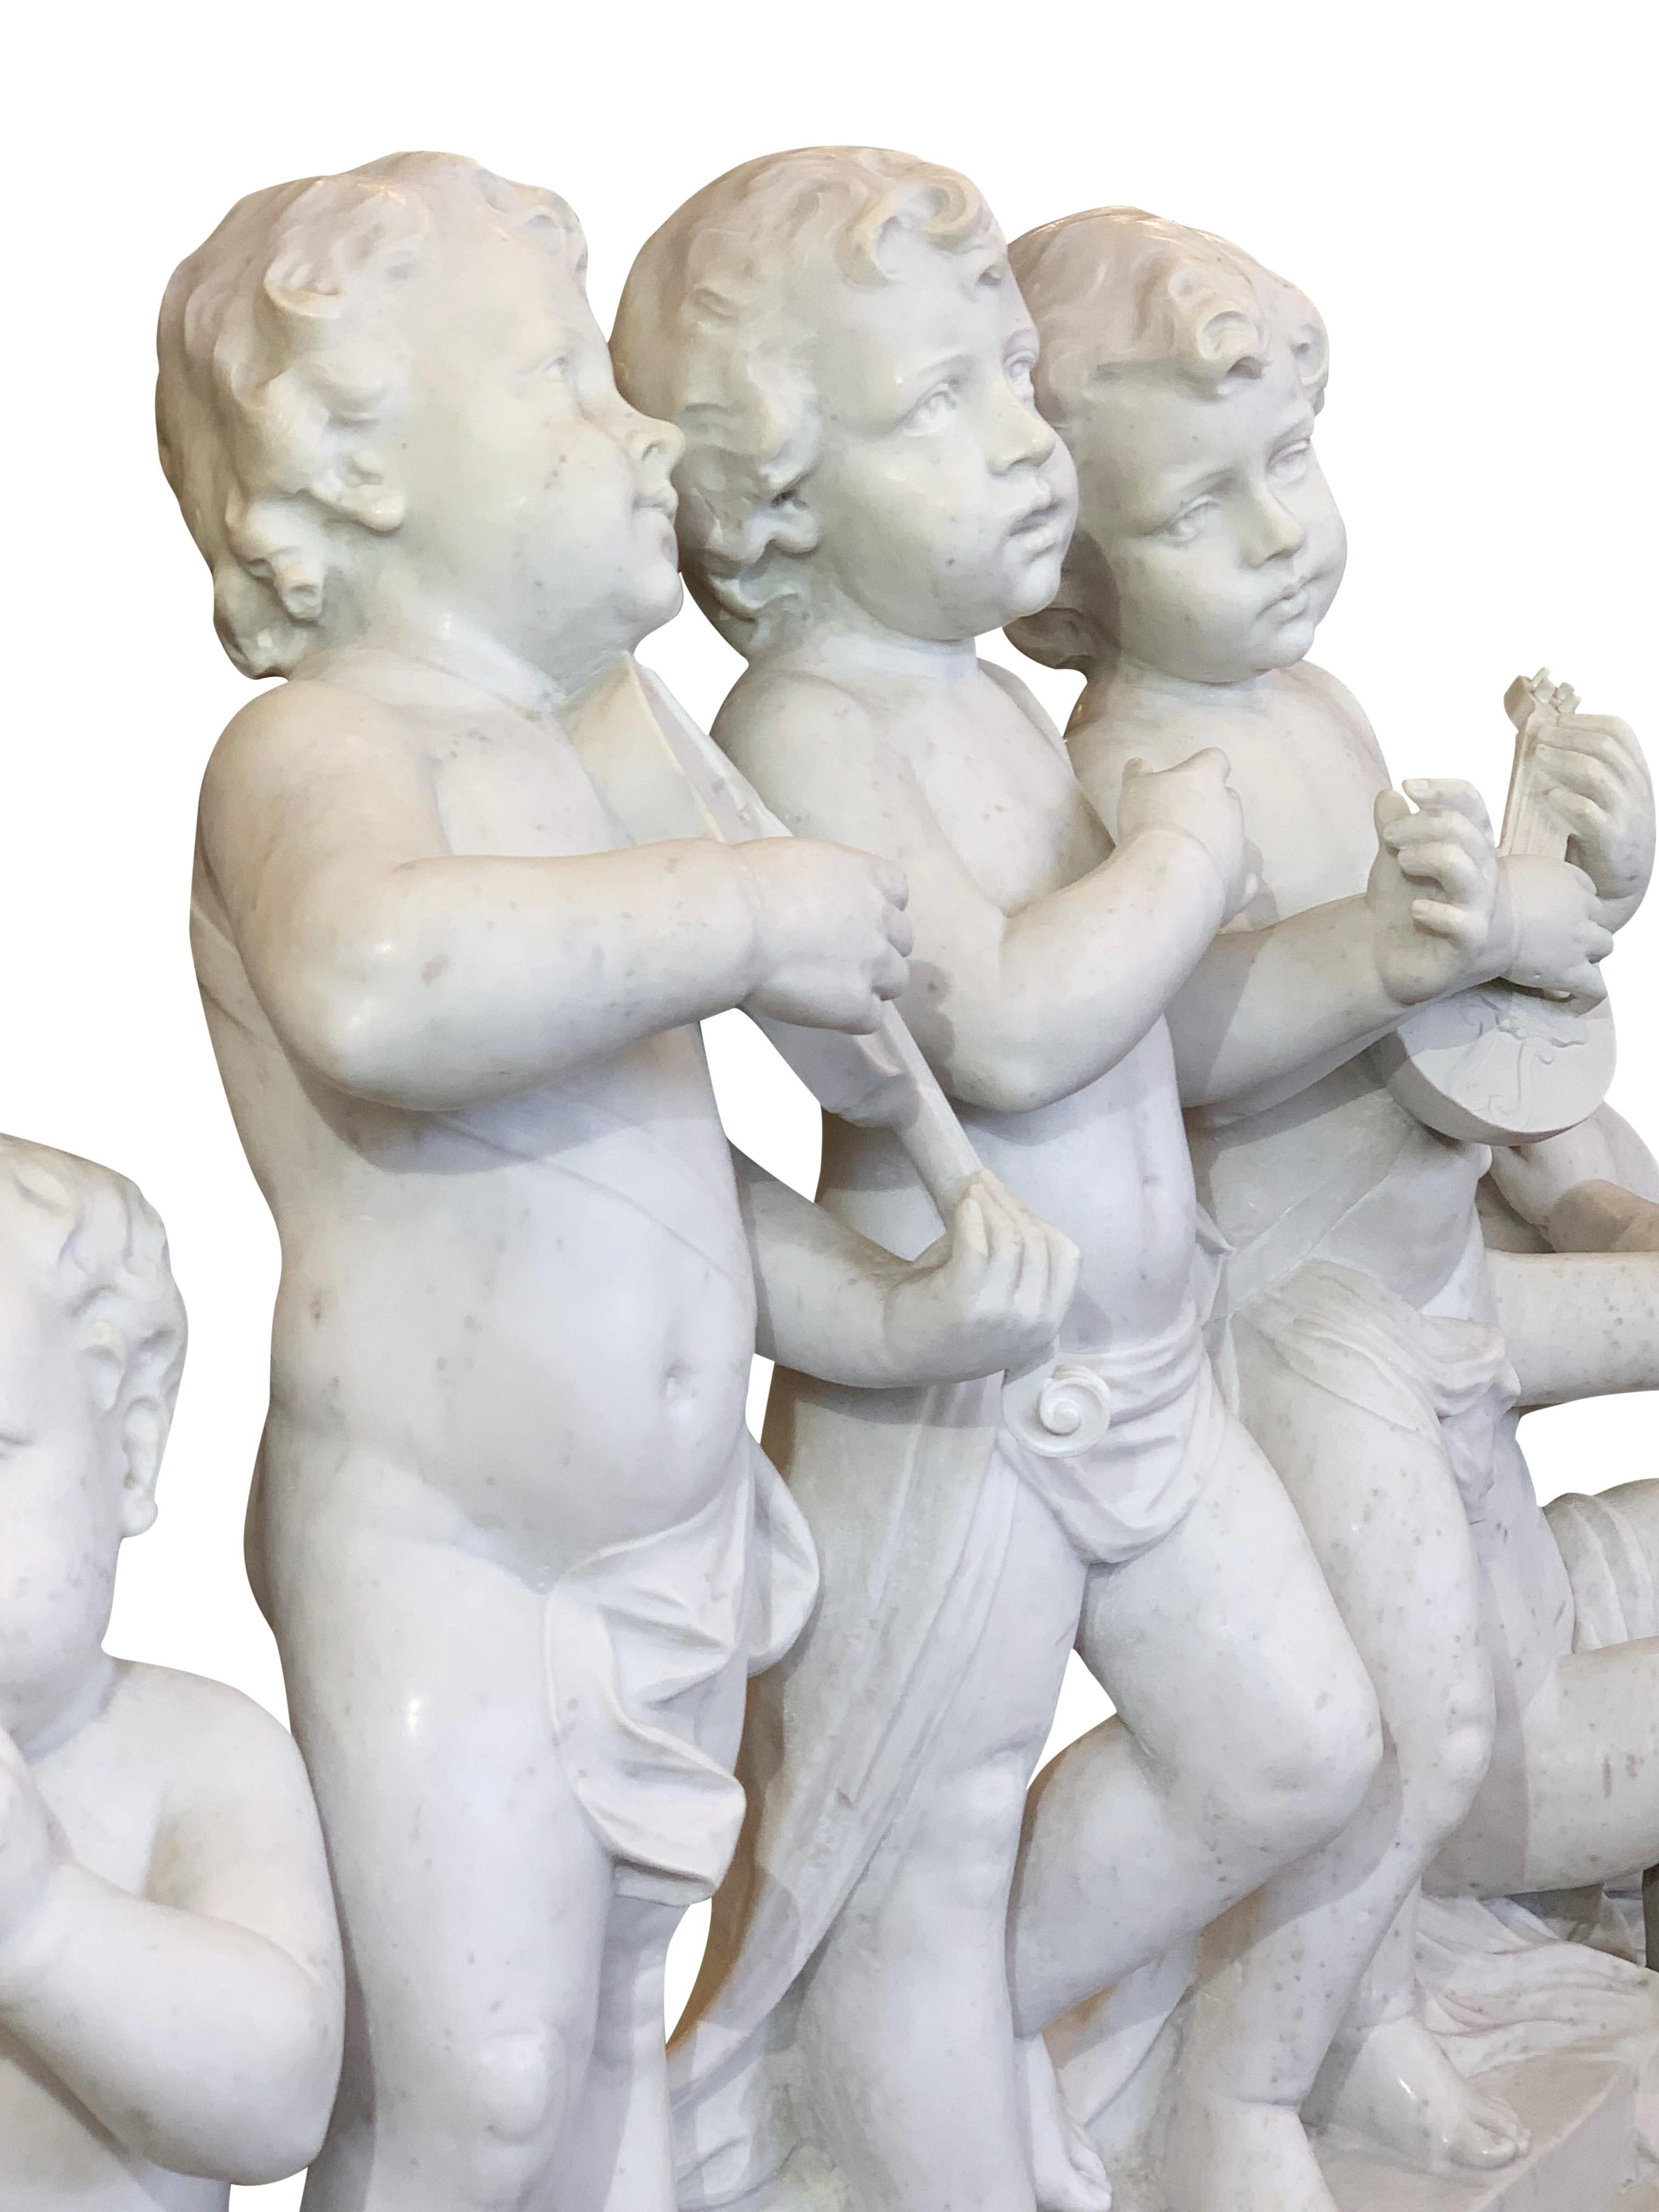 Large 19th Century Italian Carved Marble Group Depicting Musicians  on stand 9